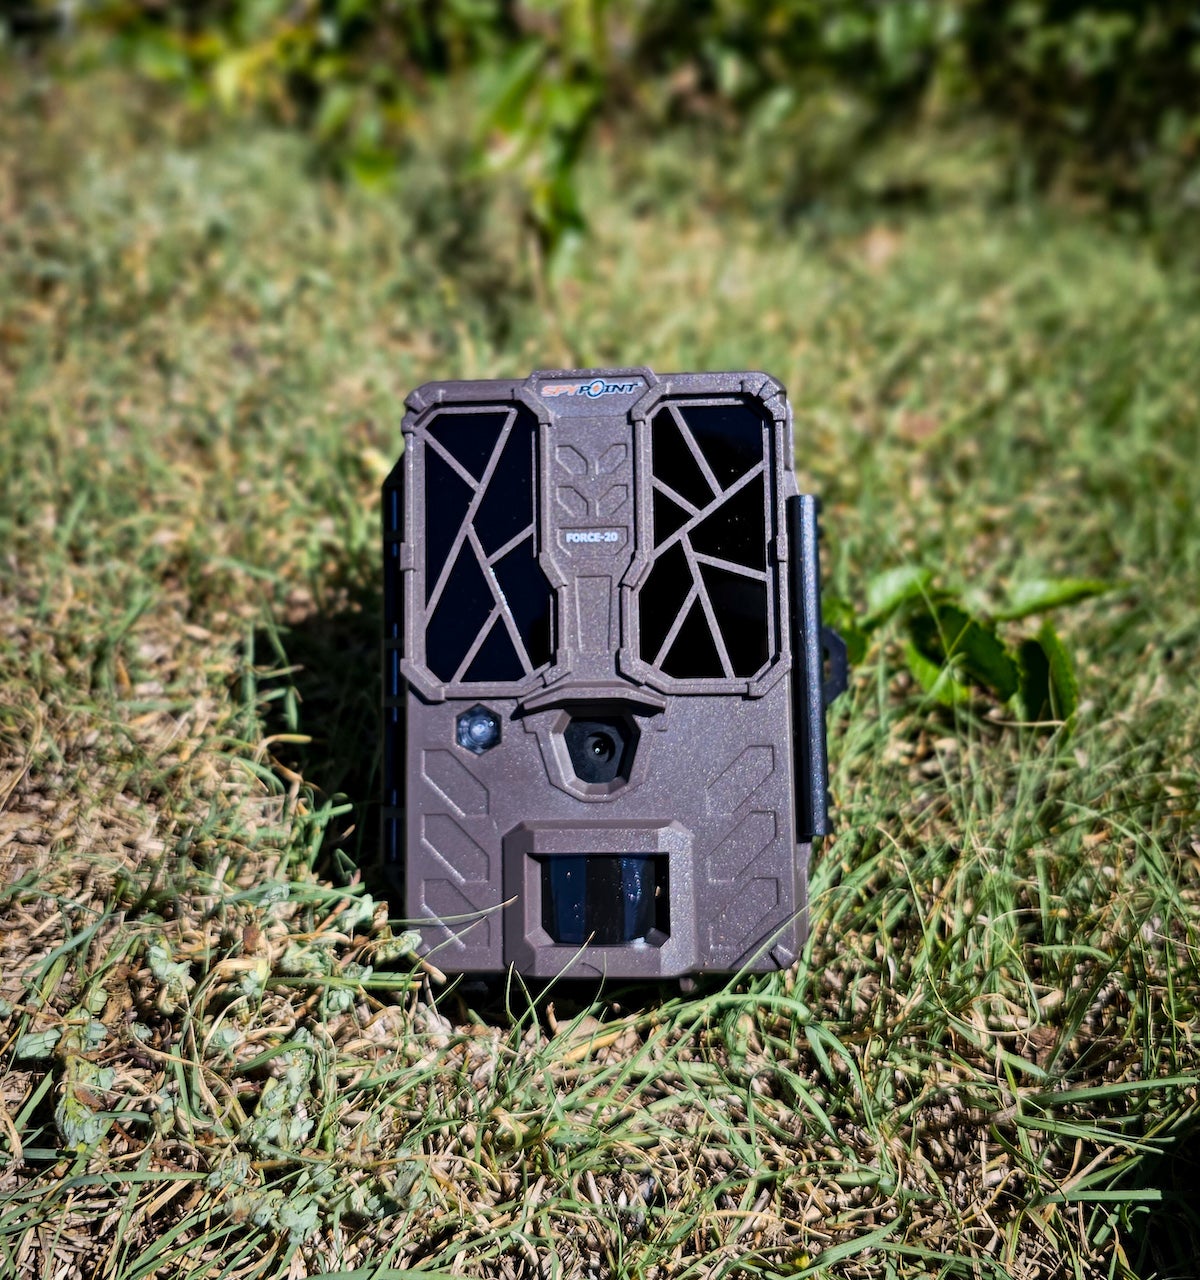 SpyPoint Force-20 trail camera sitting on grass